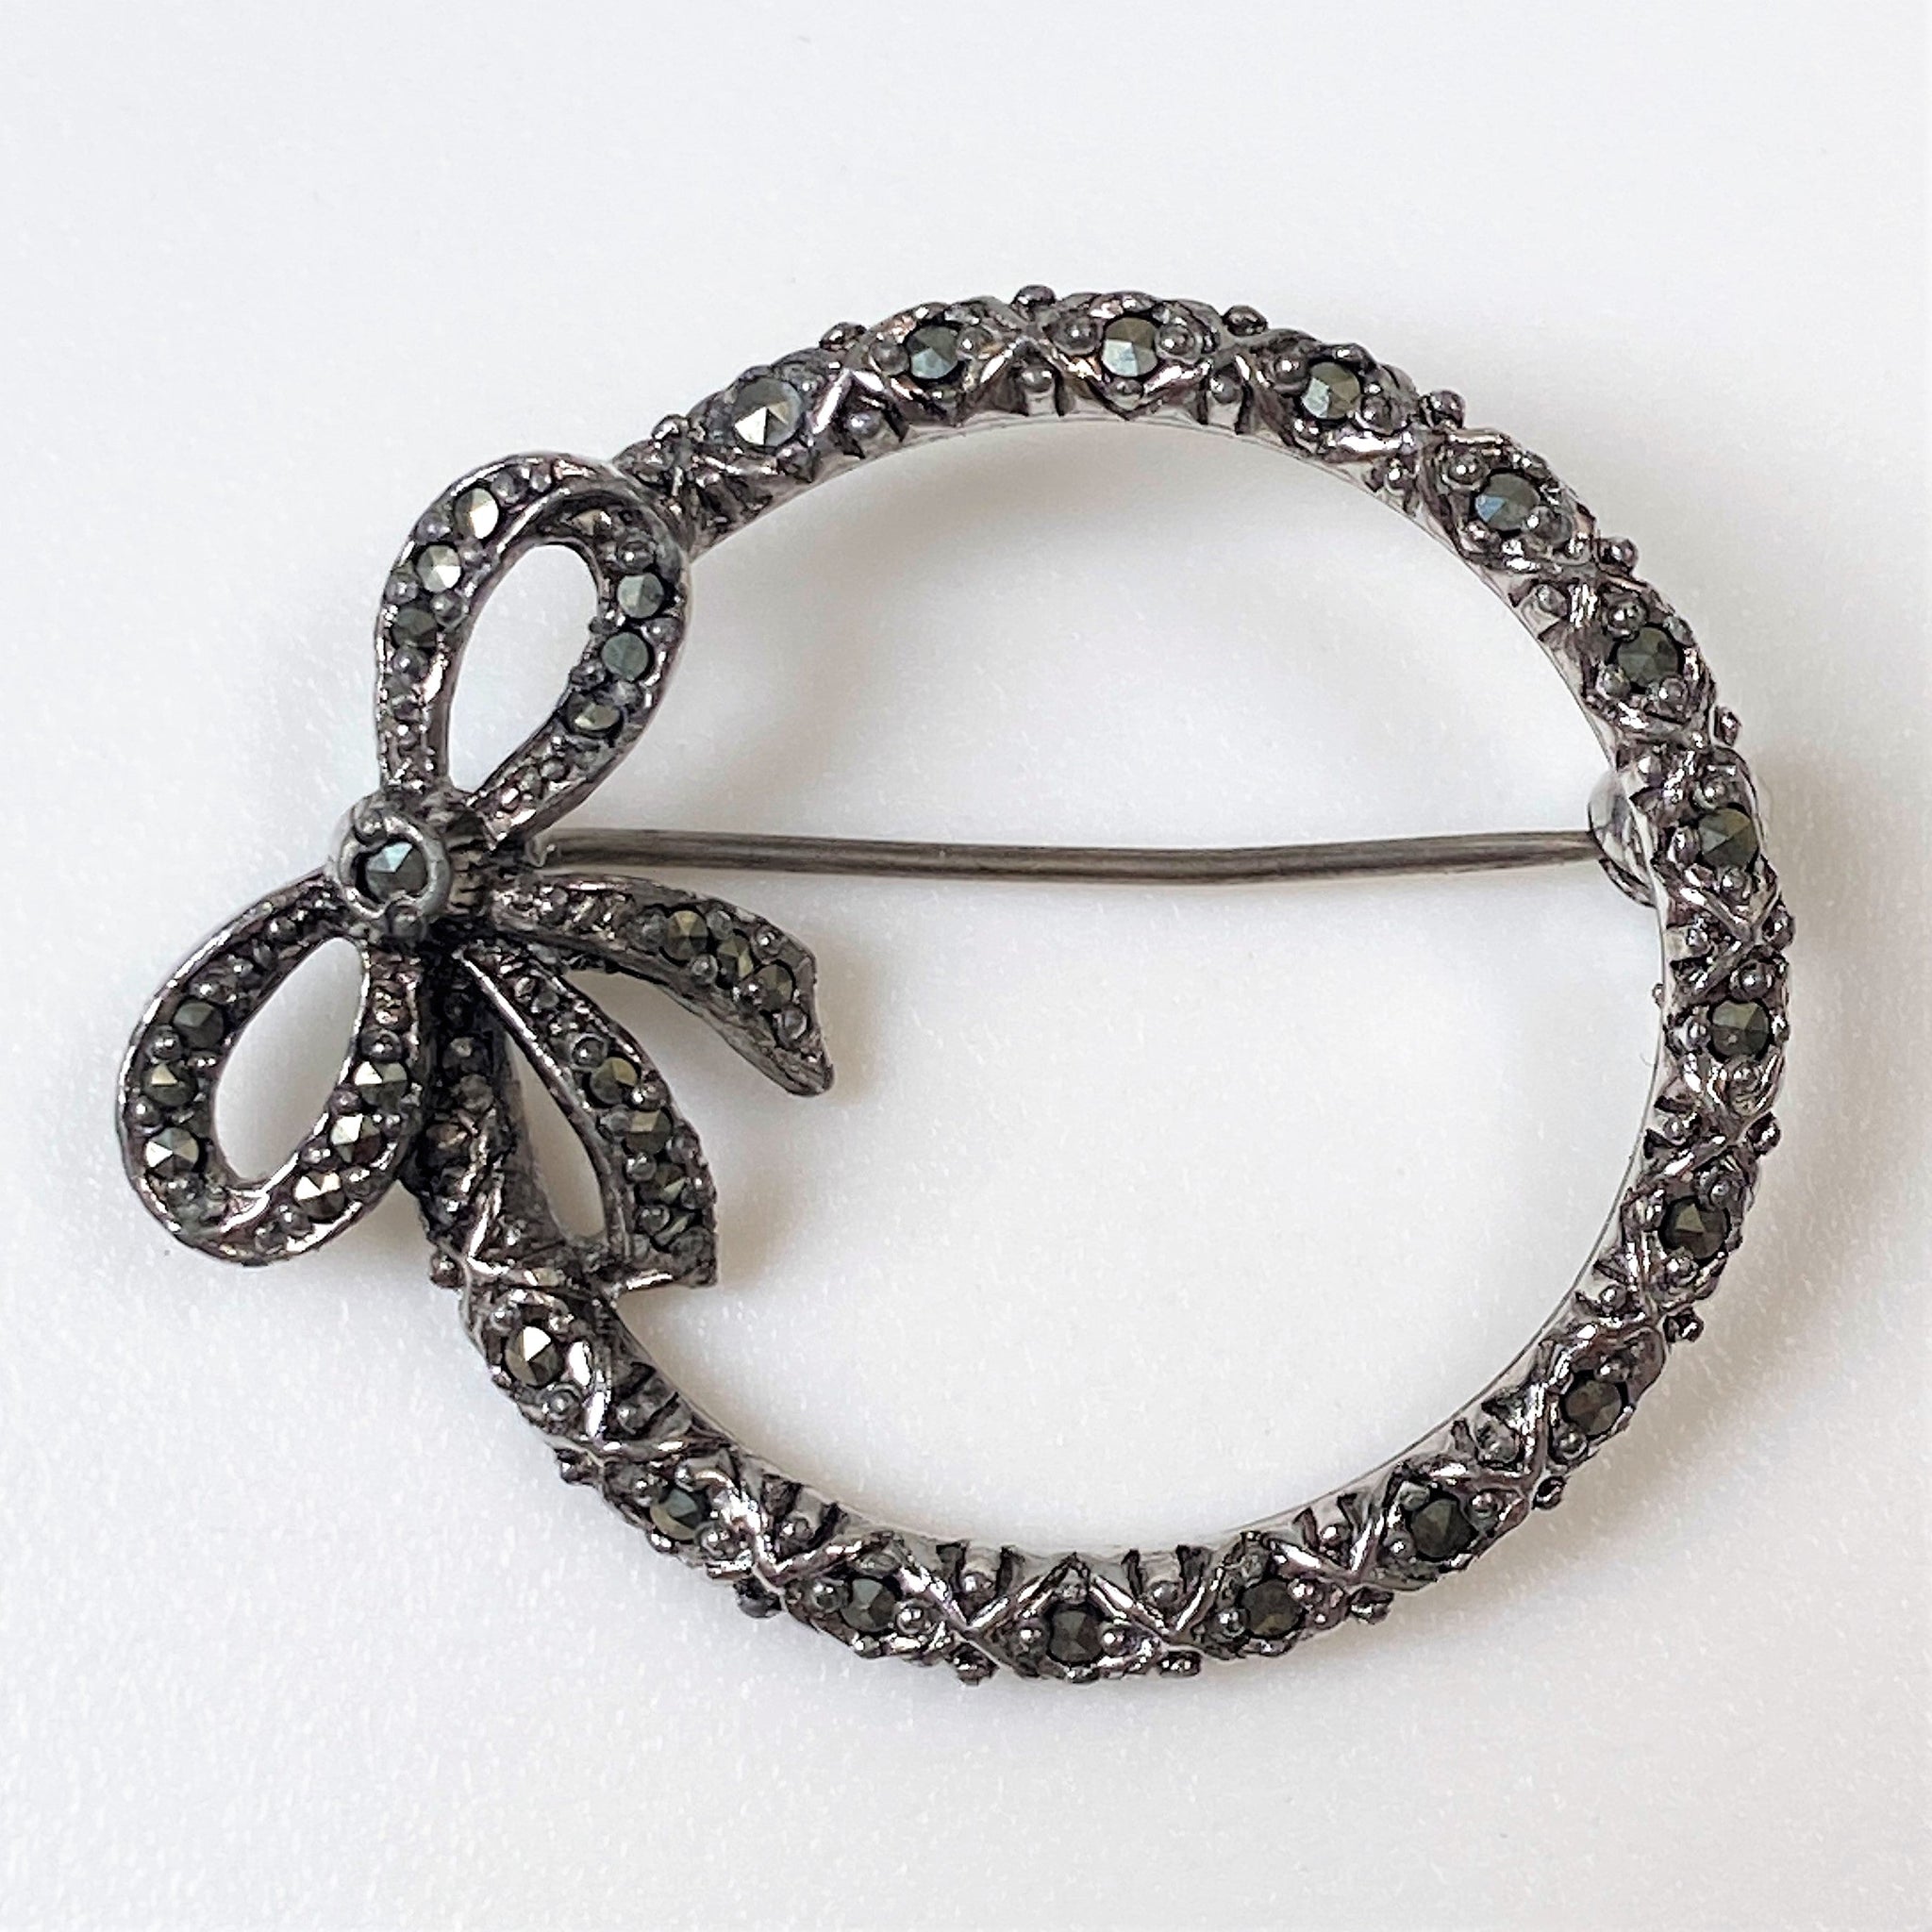 Vintage White Metal and Marcasite Wreath Brooch